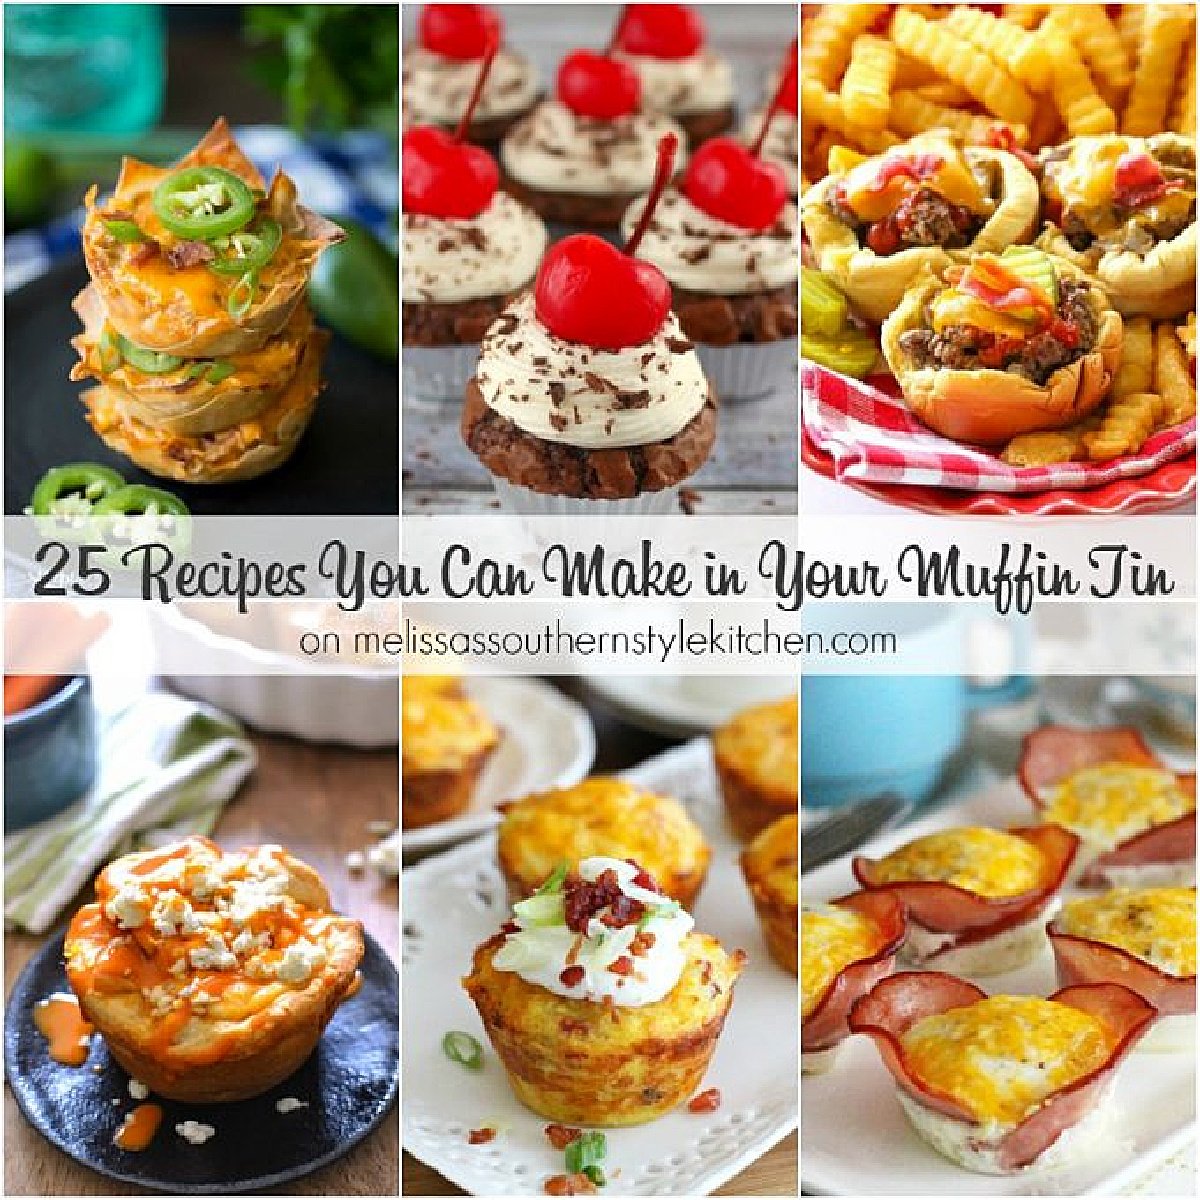 25 Recipes You Can Make in Your Muffin Tin ...